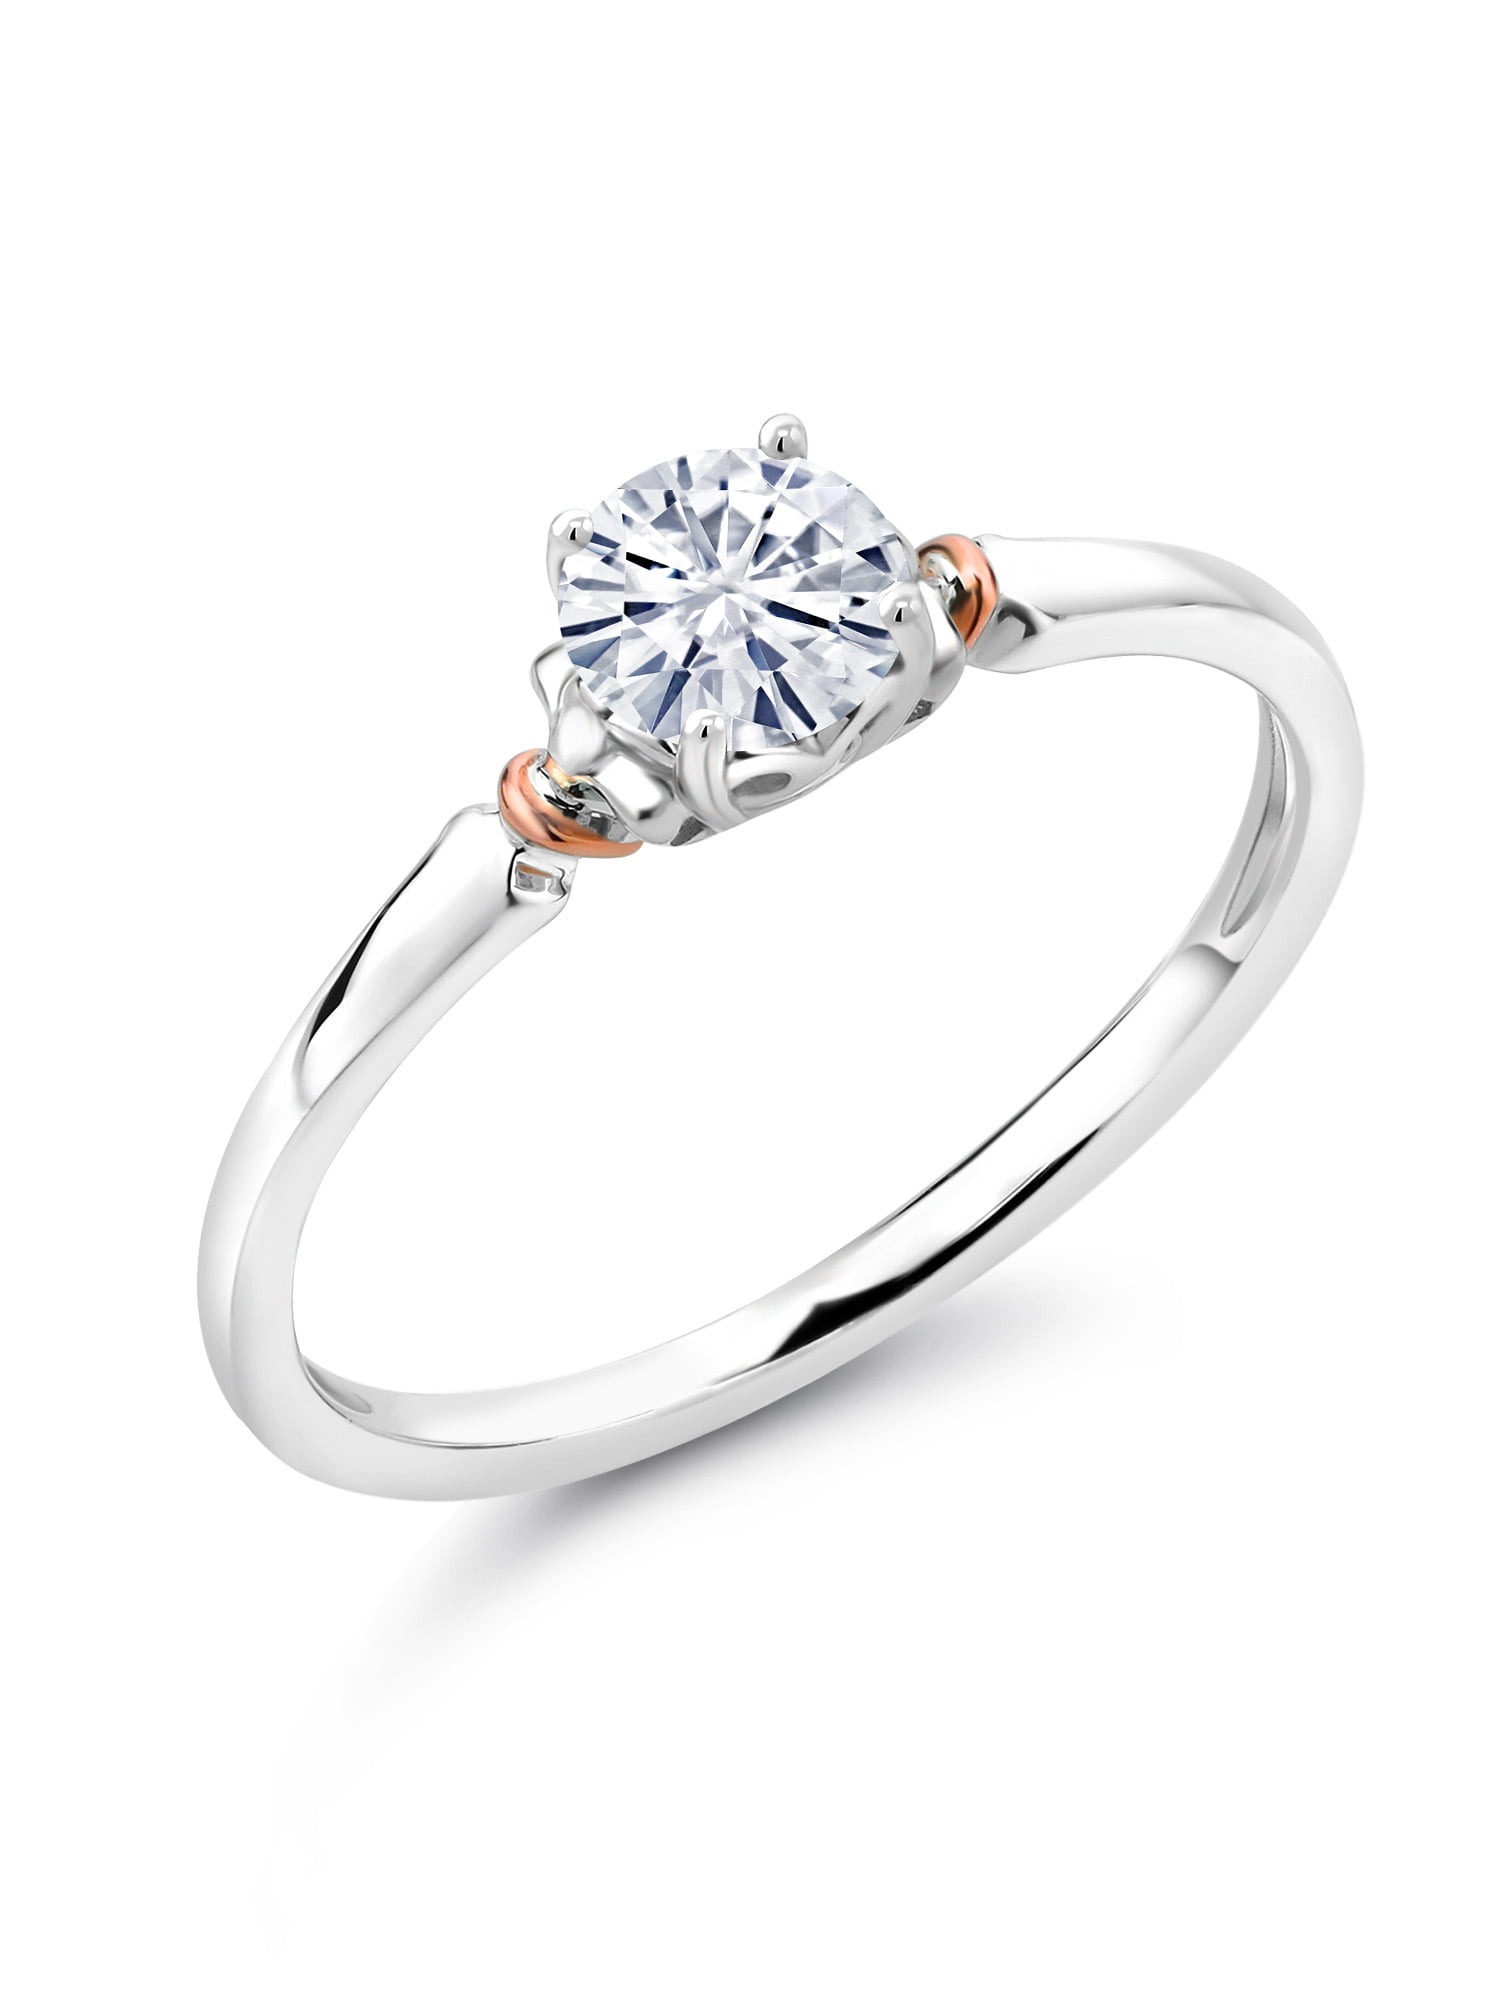 Available 5,6,7,8,9 Gem Stone King 925 Sterling Silver and 10K Rose Gold Ring White Opal with Diamond Accent 0.63 cttw 